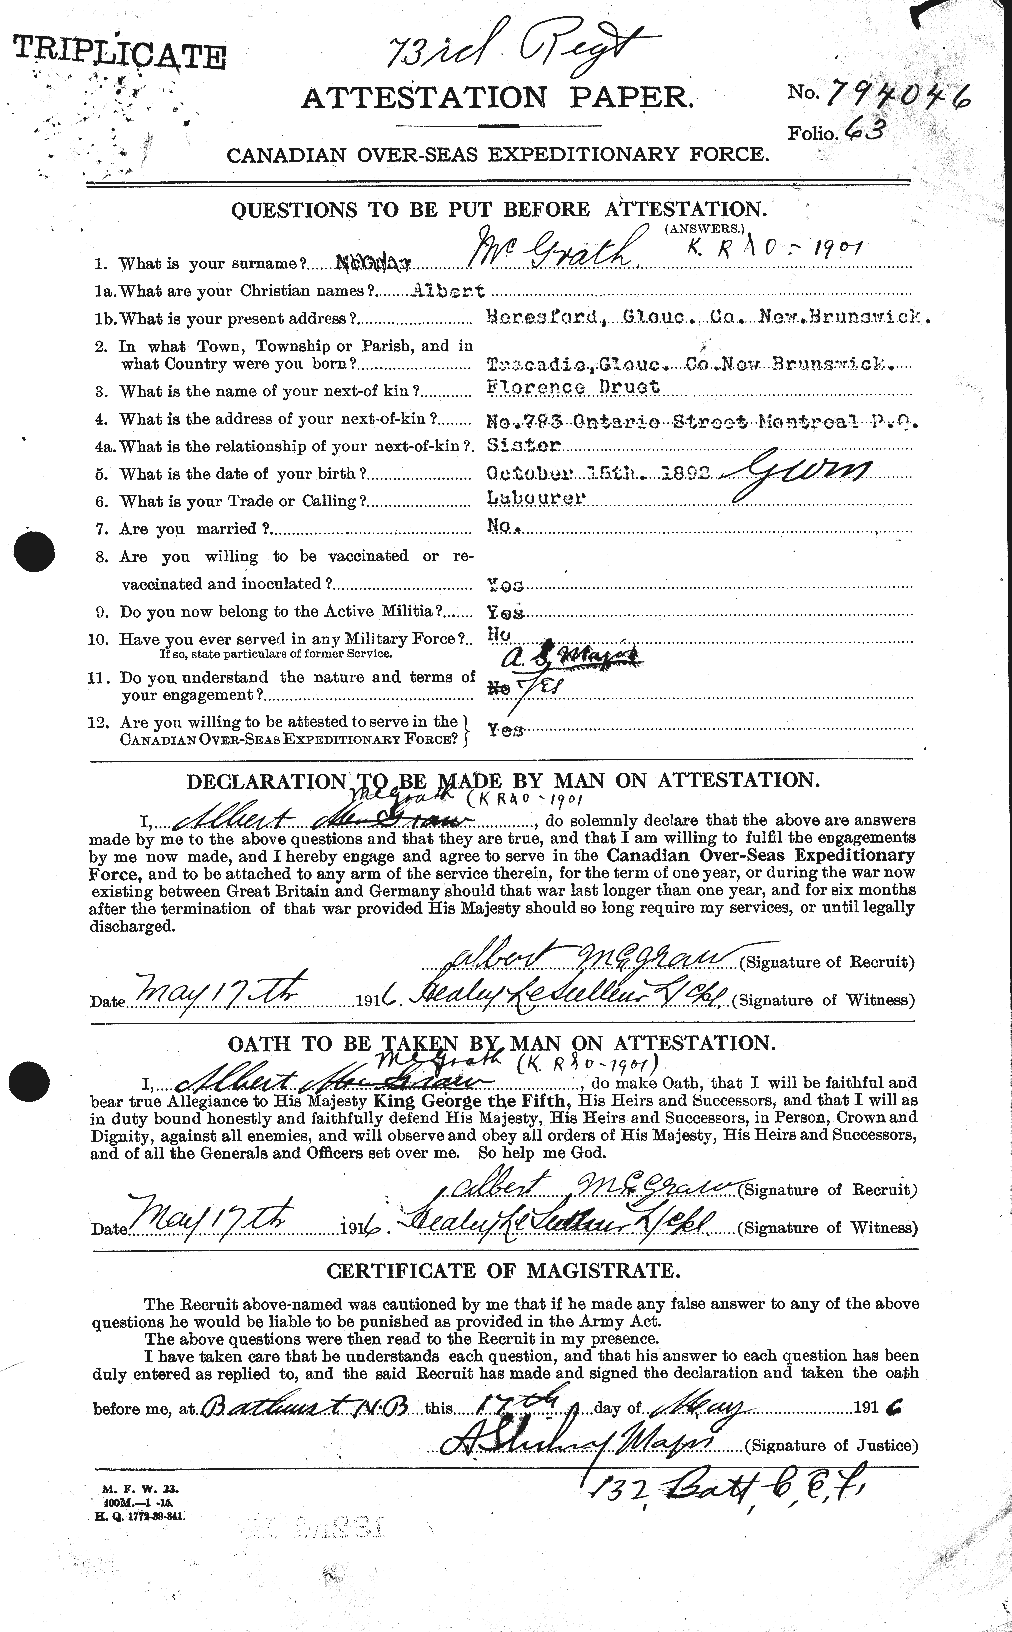 Personnel Records of the First World War - CEF 523517a